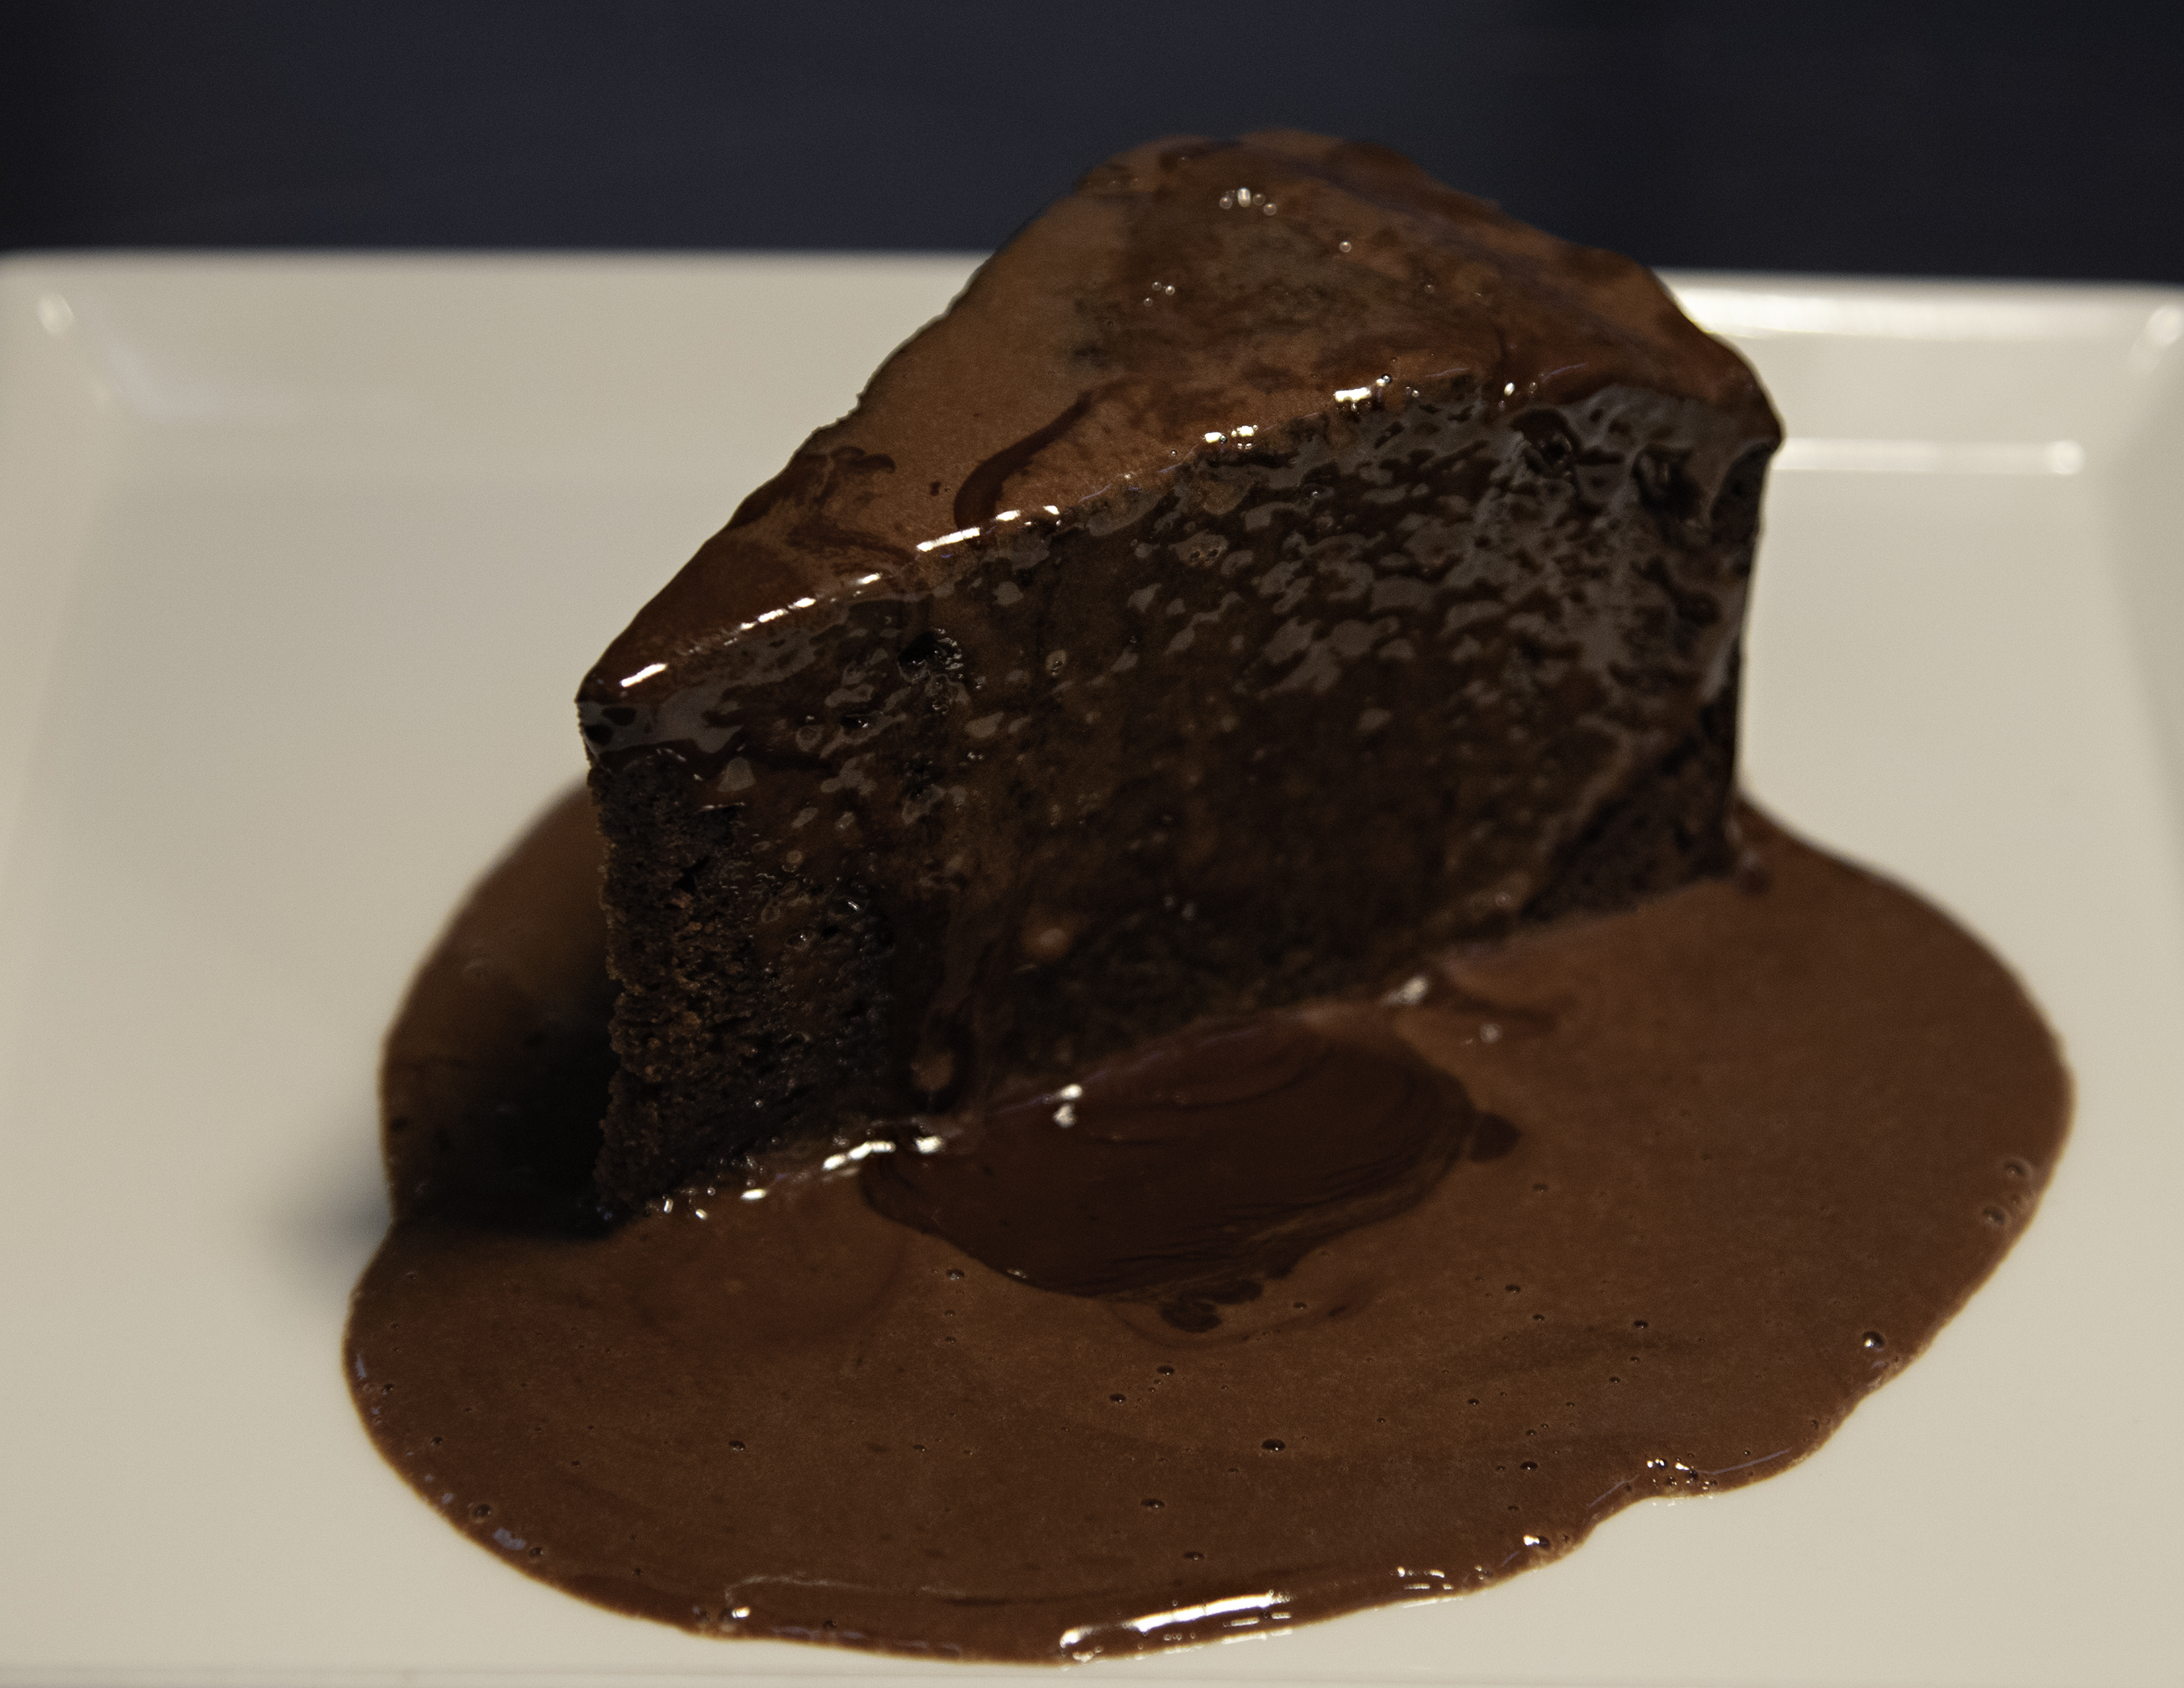 A slice of chocolate fudge cake with melted chocolate sauce on a plate.